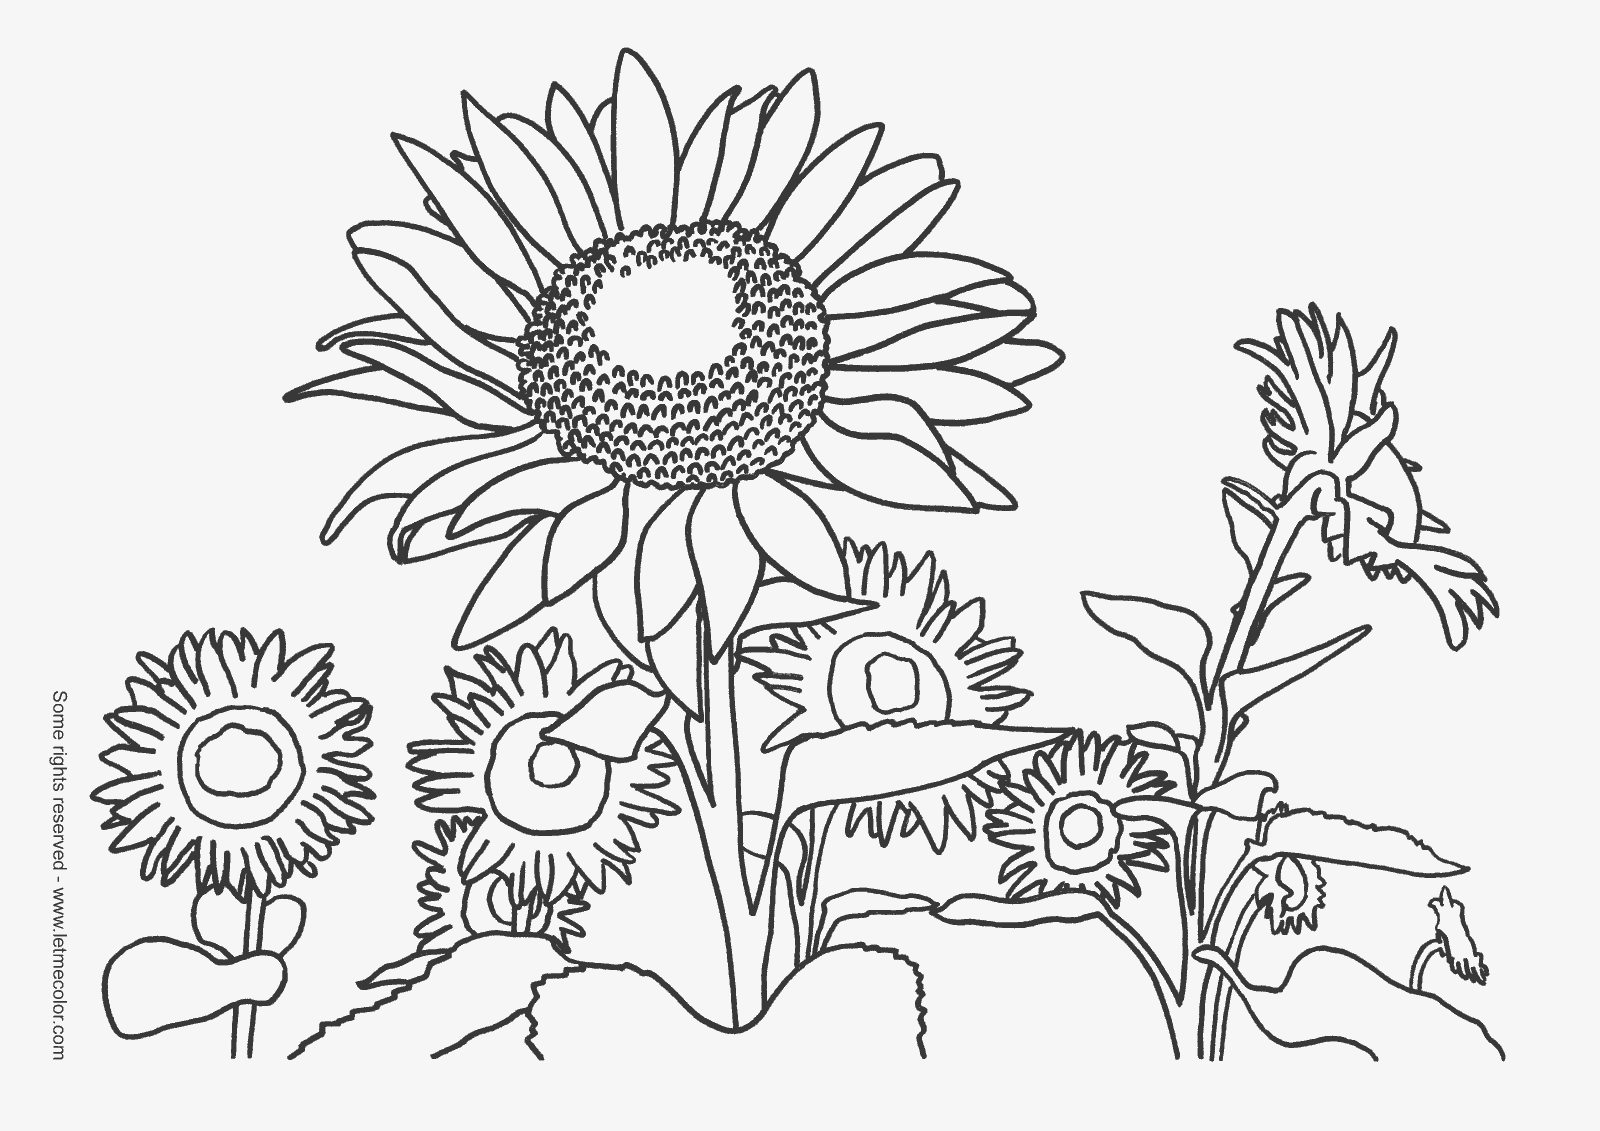 [sunflowers_coloring_page_12133.gif]